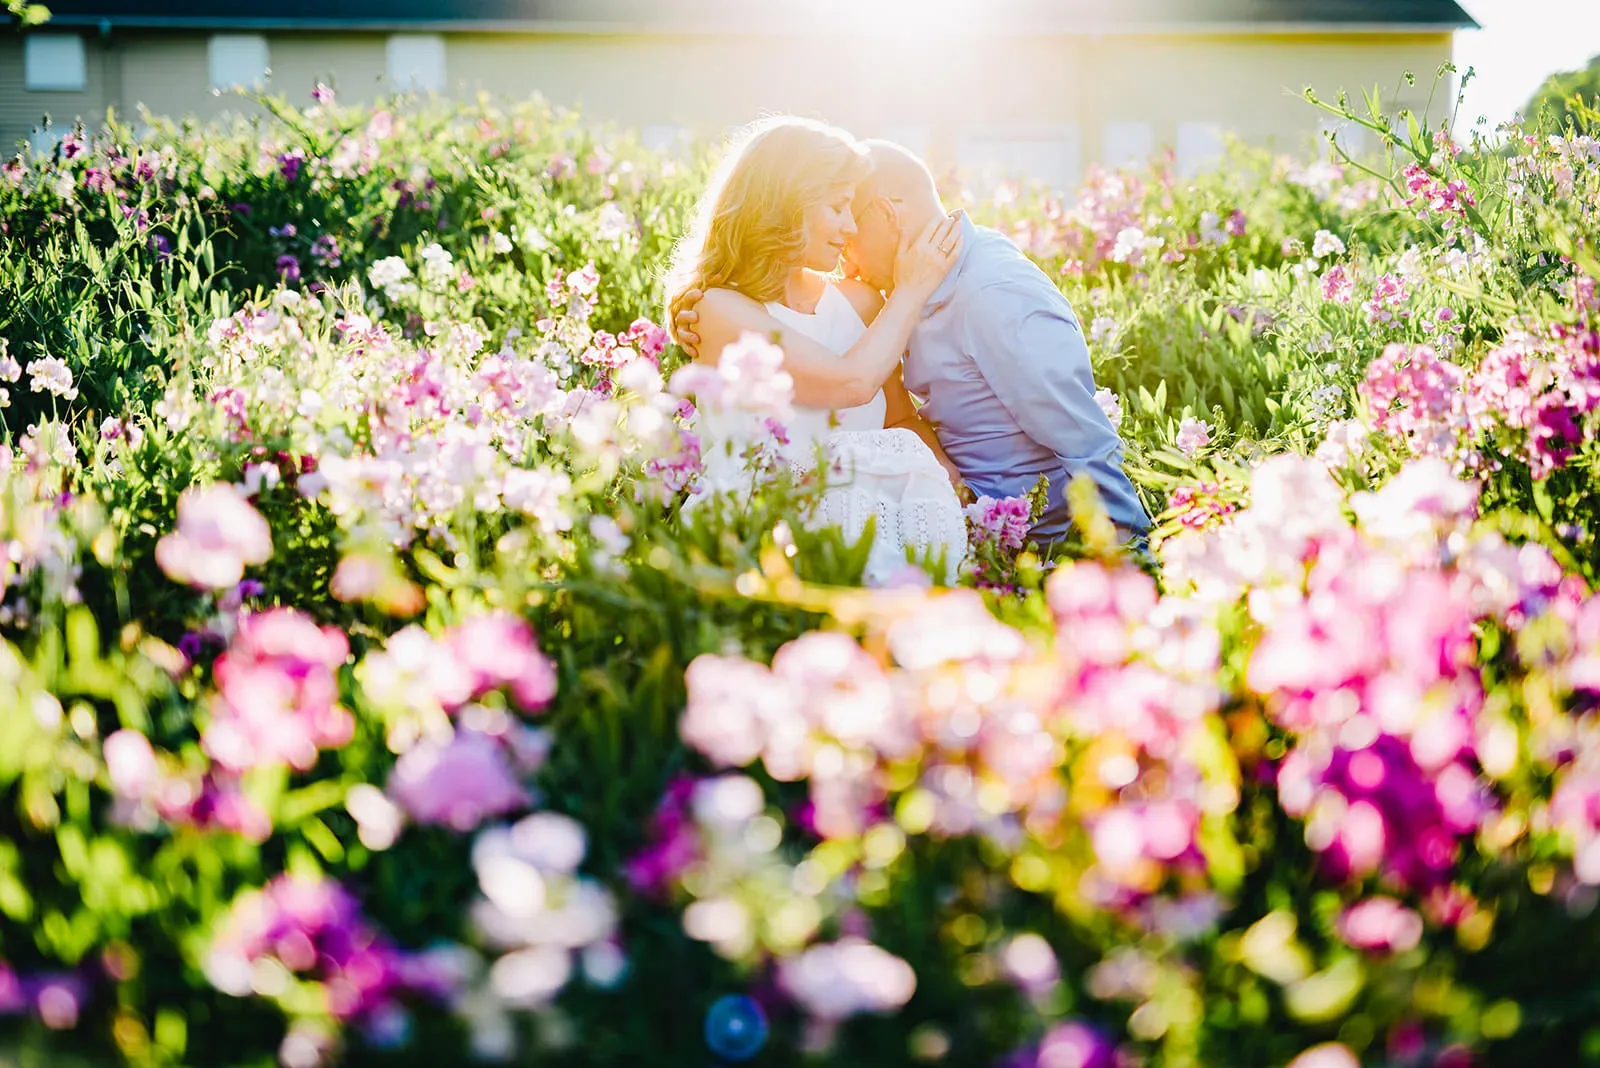 A couple sits closely, embracing each other in a field of vibrant, pink and purple flowers, with sunlight shining in the background. Both are facing each other with their eyes closed, sharing an intimate moment. The scene is bathed in warm light. captured by Seattle Wedding Photographers Jenn Tai & Co